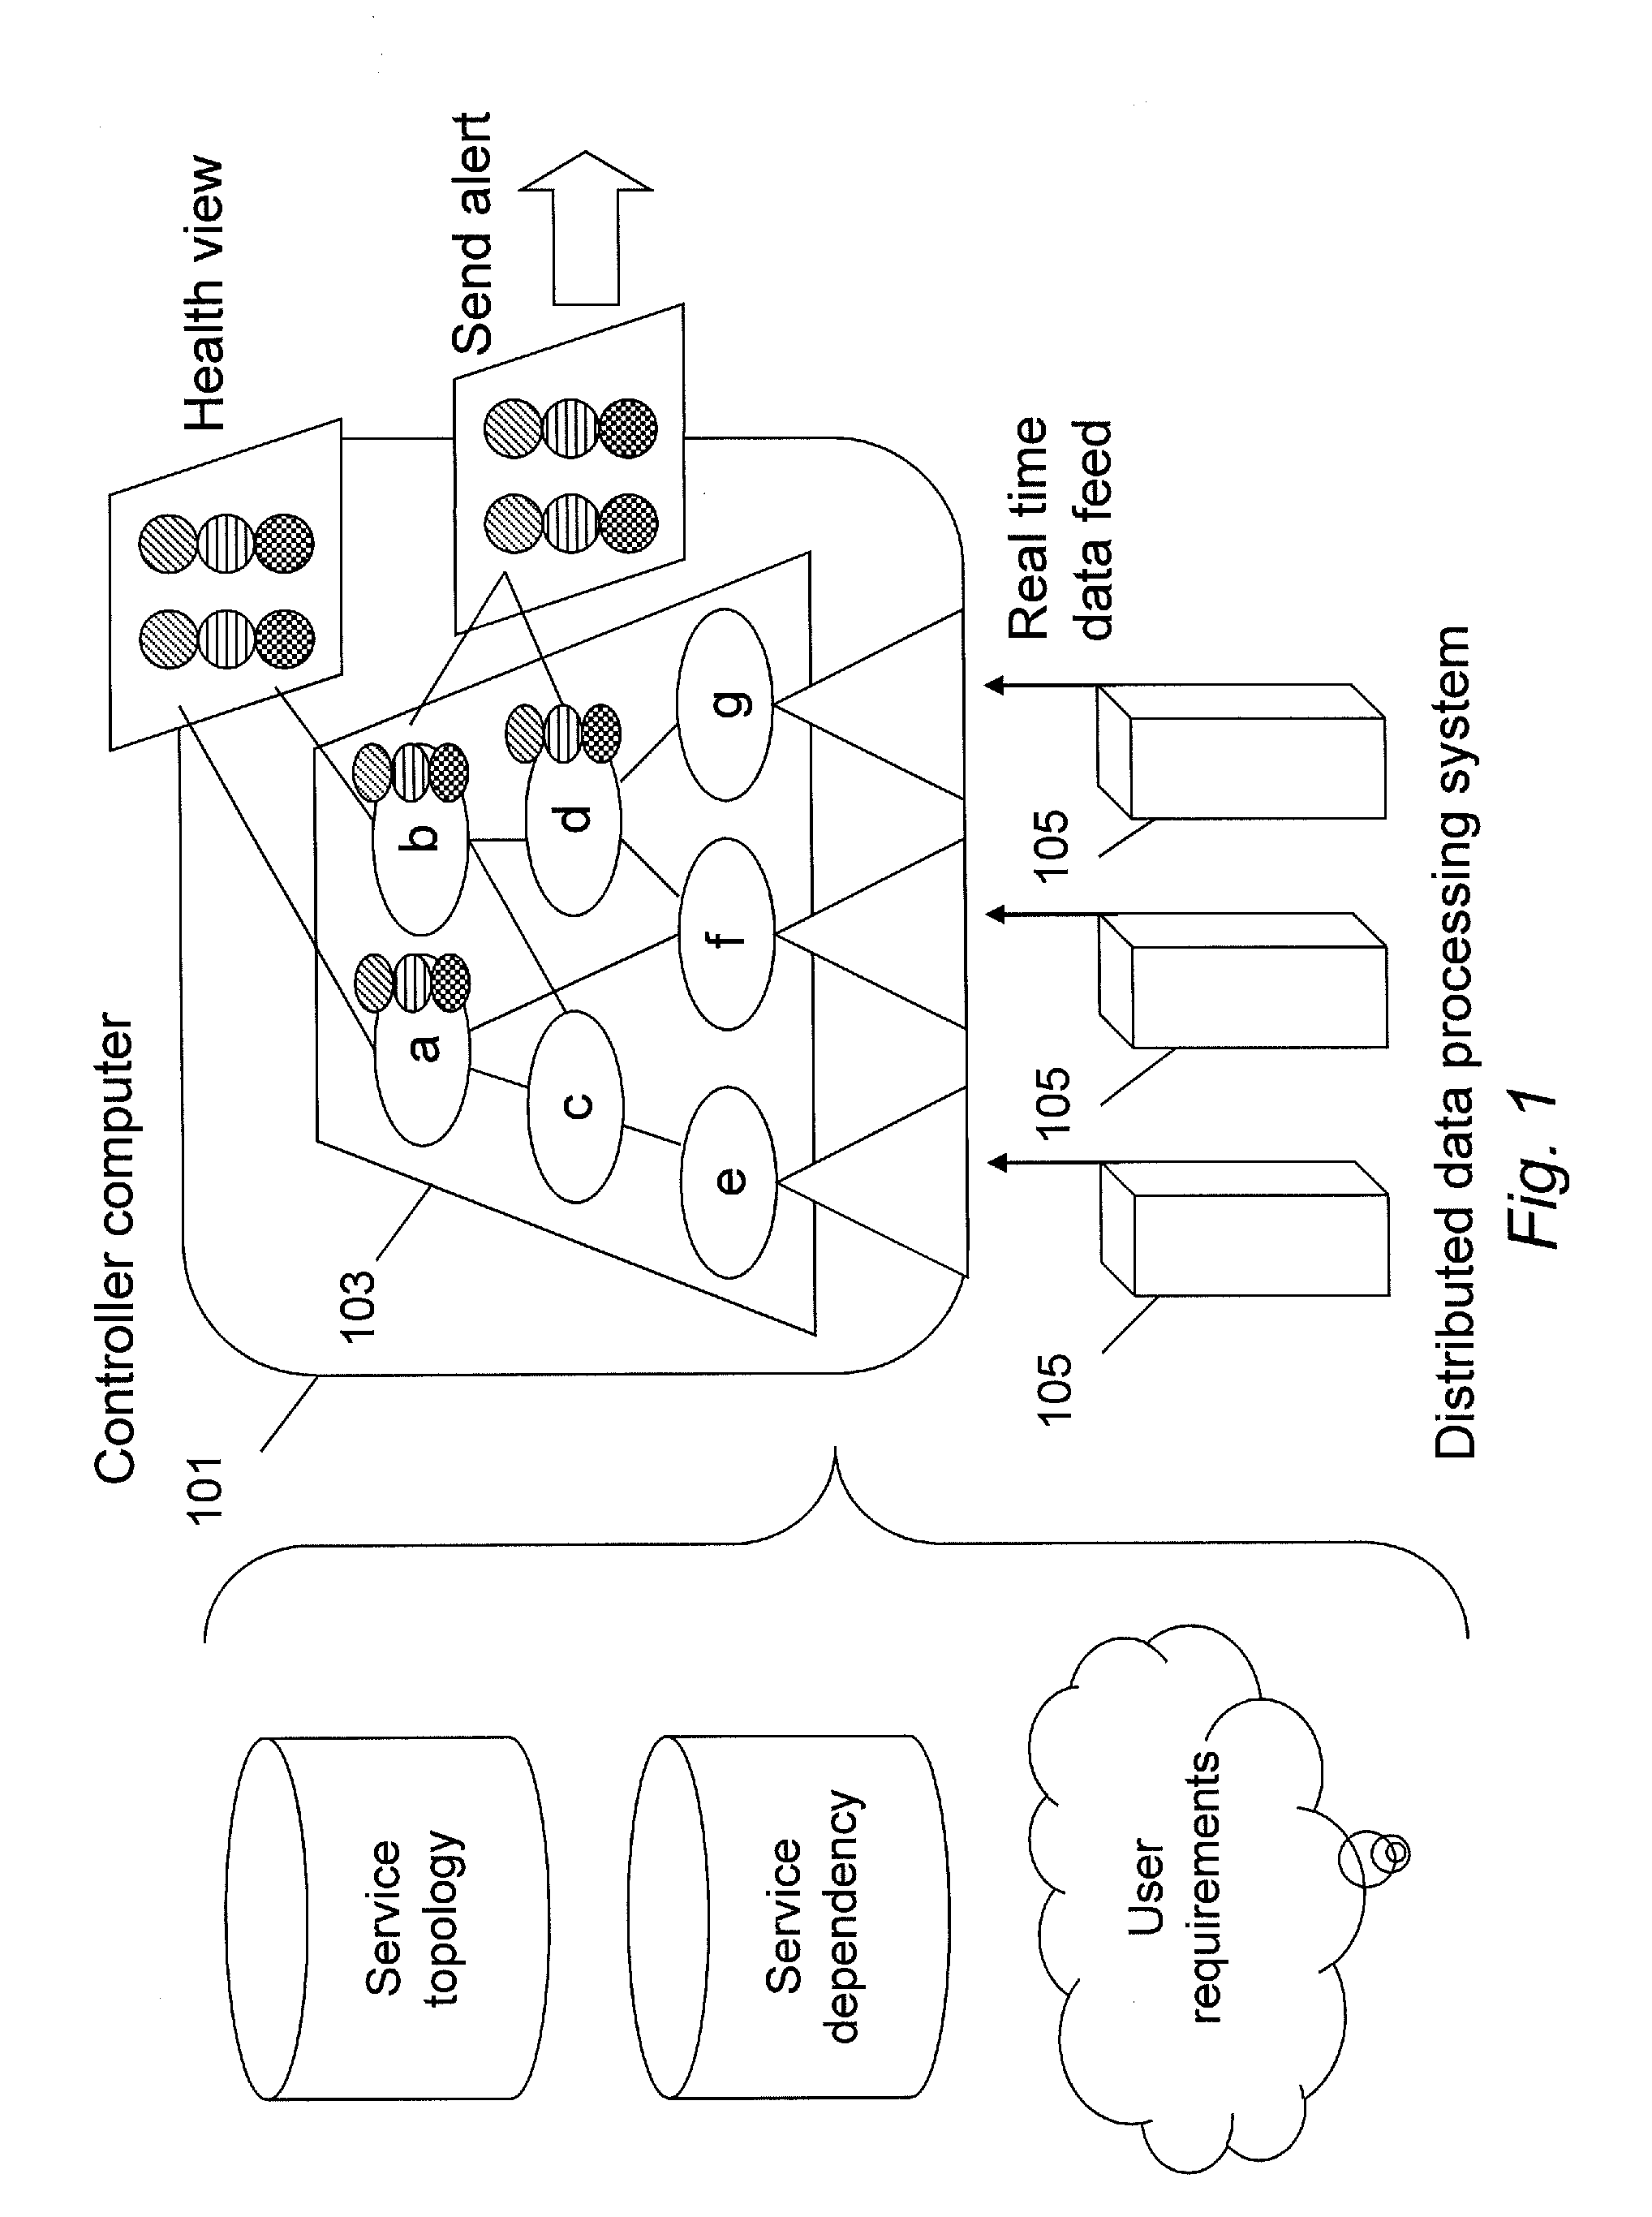 Method and system for functional monitoring in multi-server reservation system